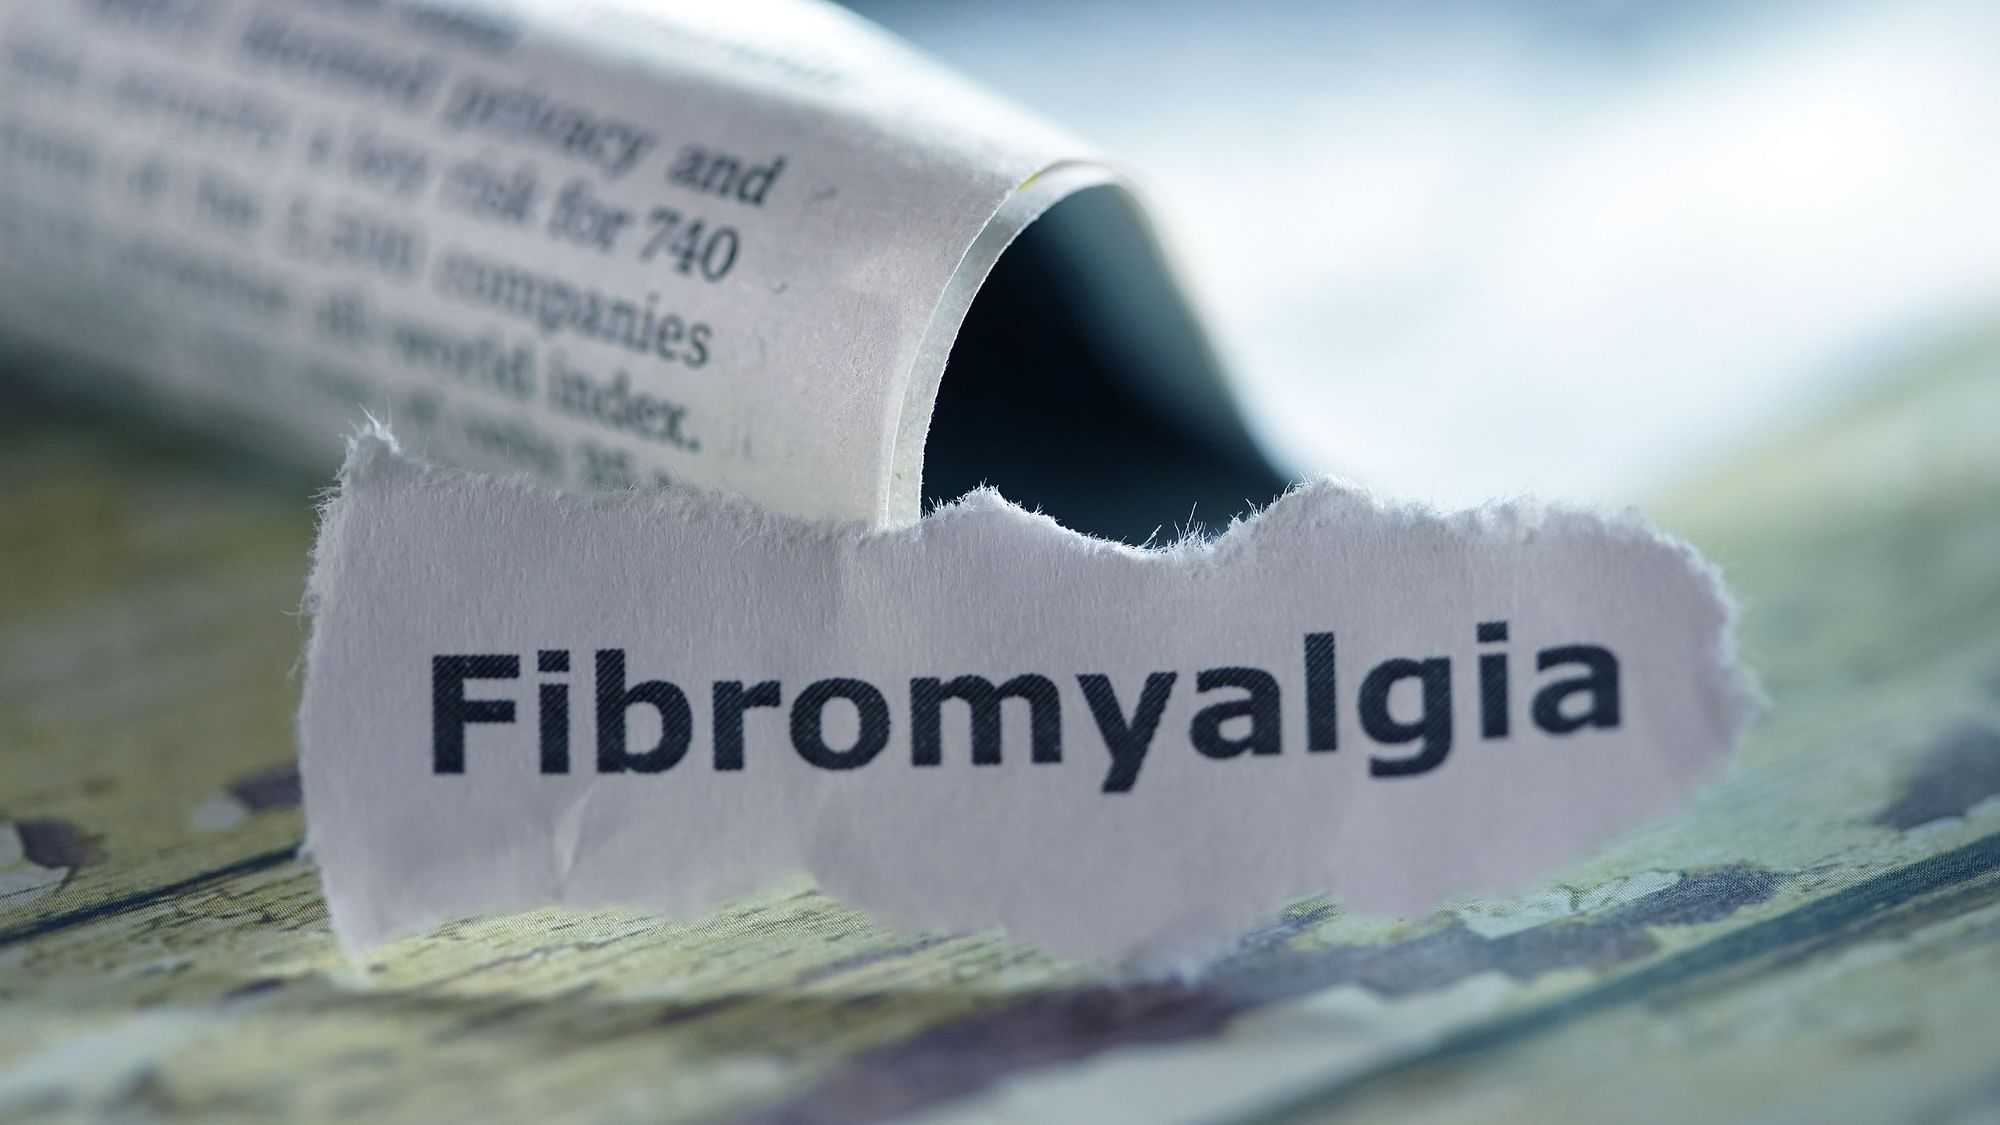 &quot;I suffer from a chronic pain condition called Fibromyalgia that has symptoms like widespread pain, chronic fatigue, sleep disturbances, cognitive issues, and myriad other debilitating symptoms.&quot;